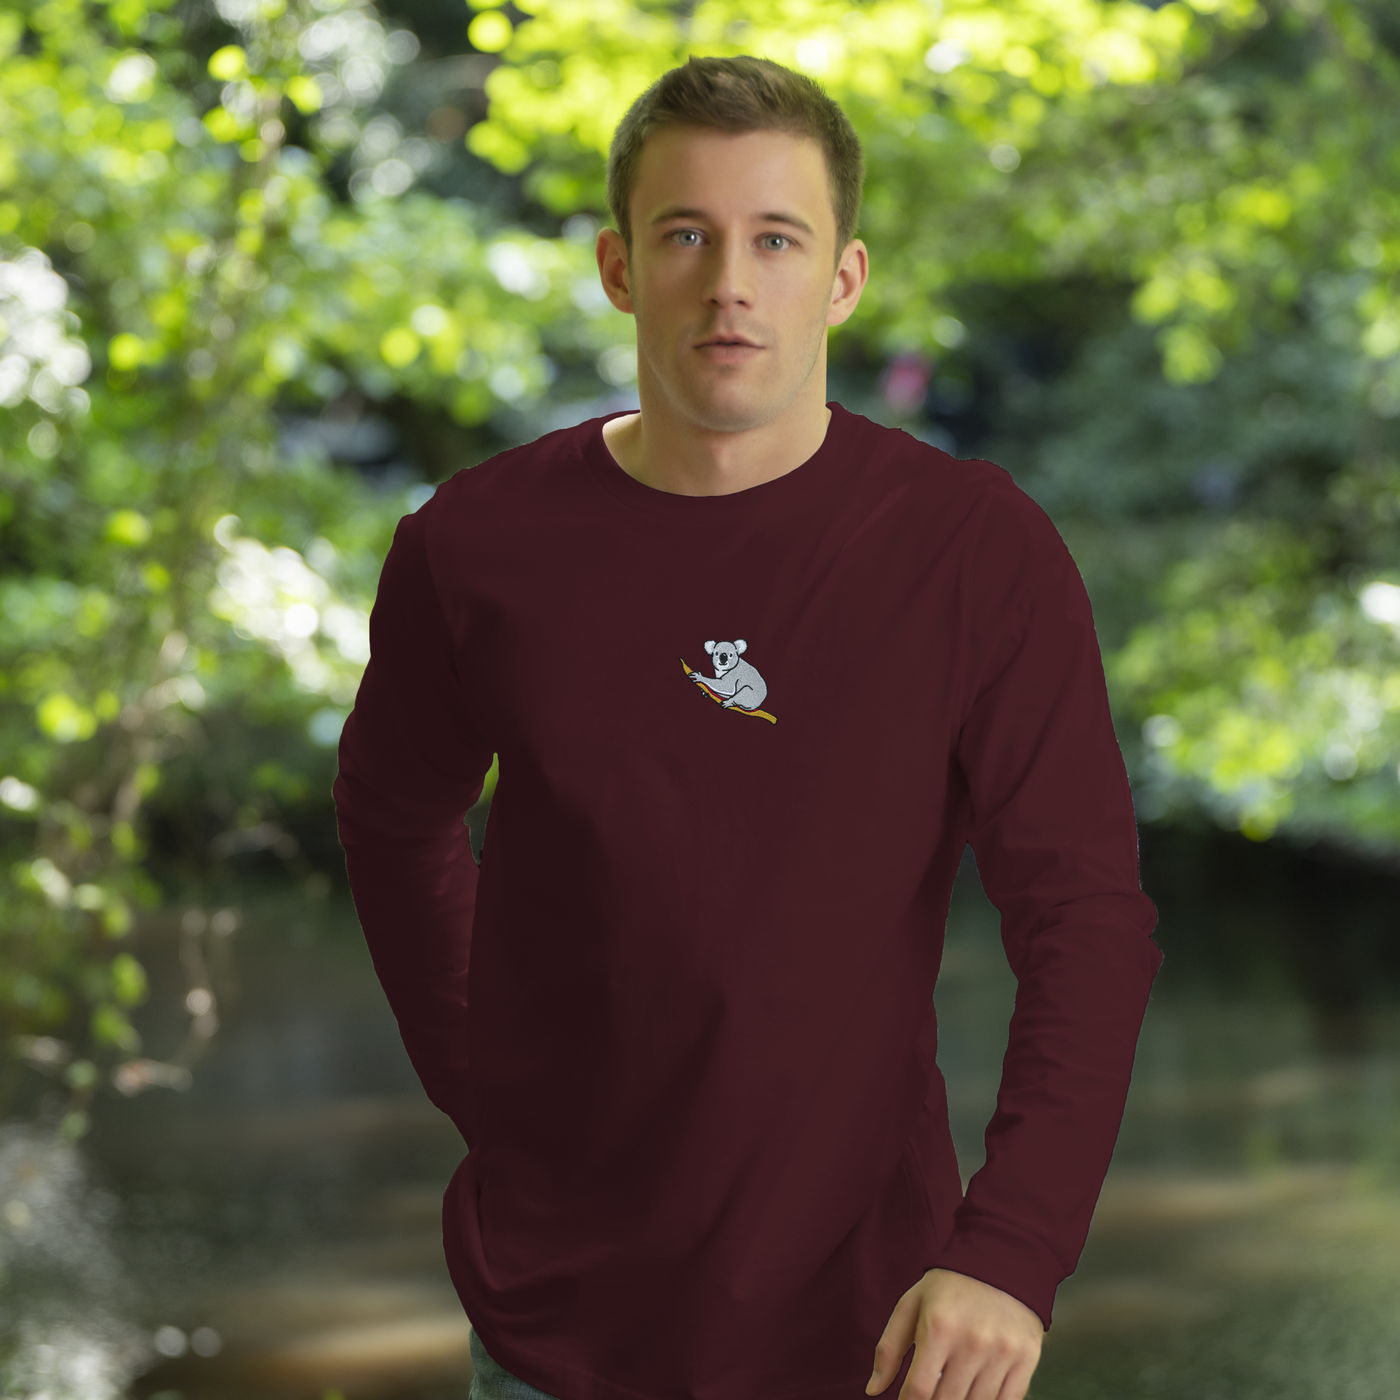 Bobby's Planet Men's Embroidered Koala Long Sleeve Shirt from Australia Down Under Animals Collection in Maroon Color#color_maroon